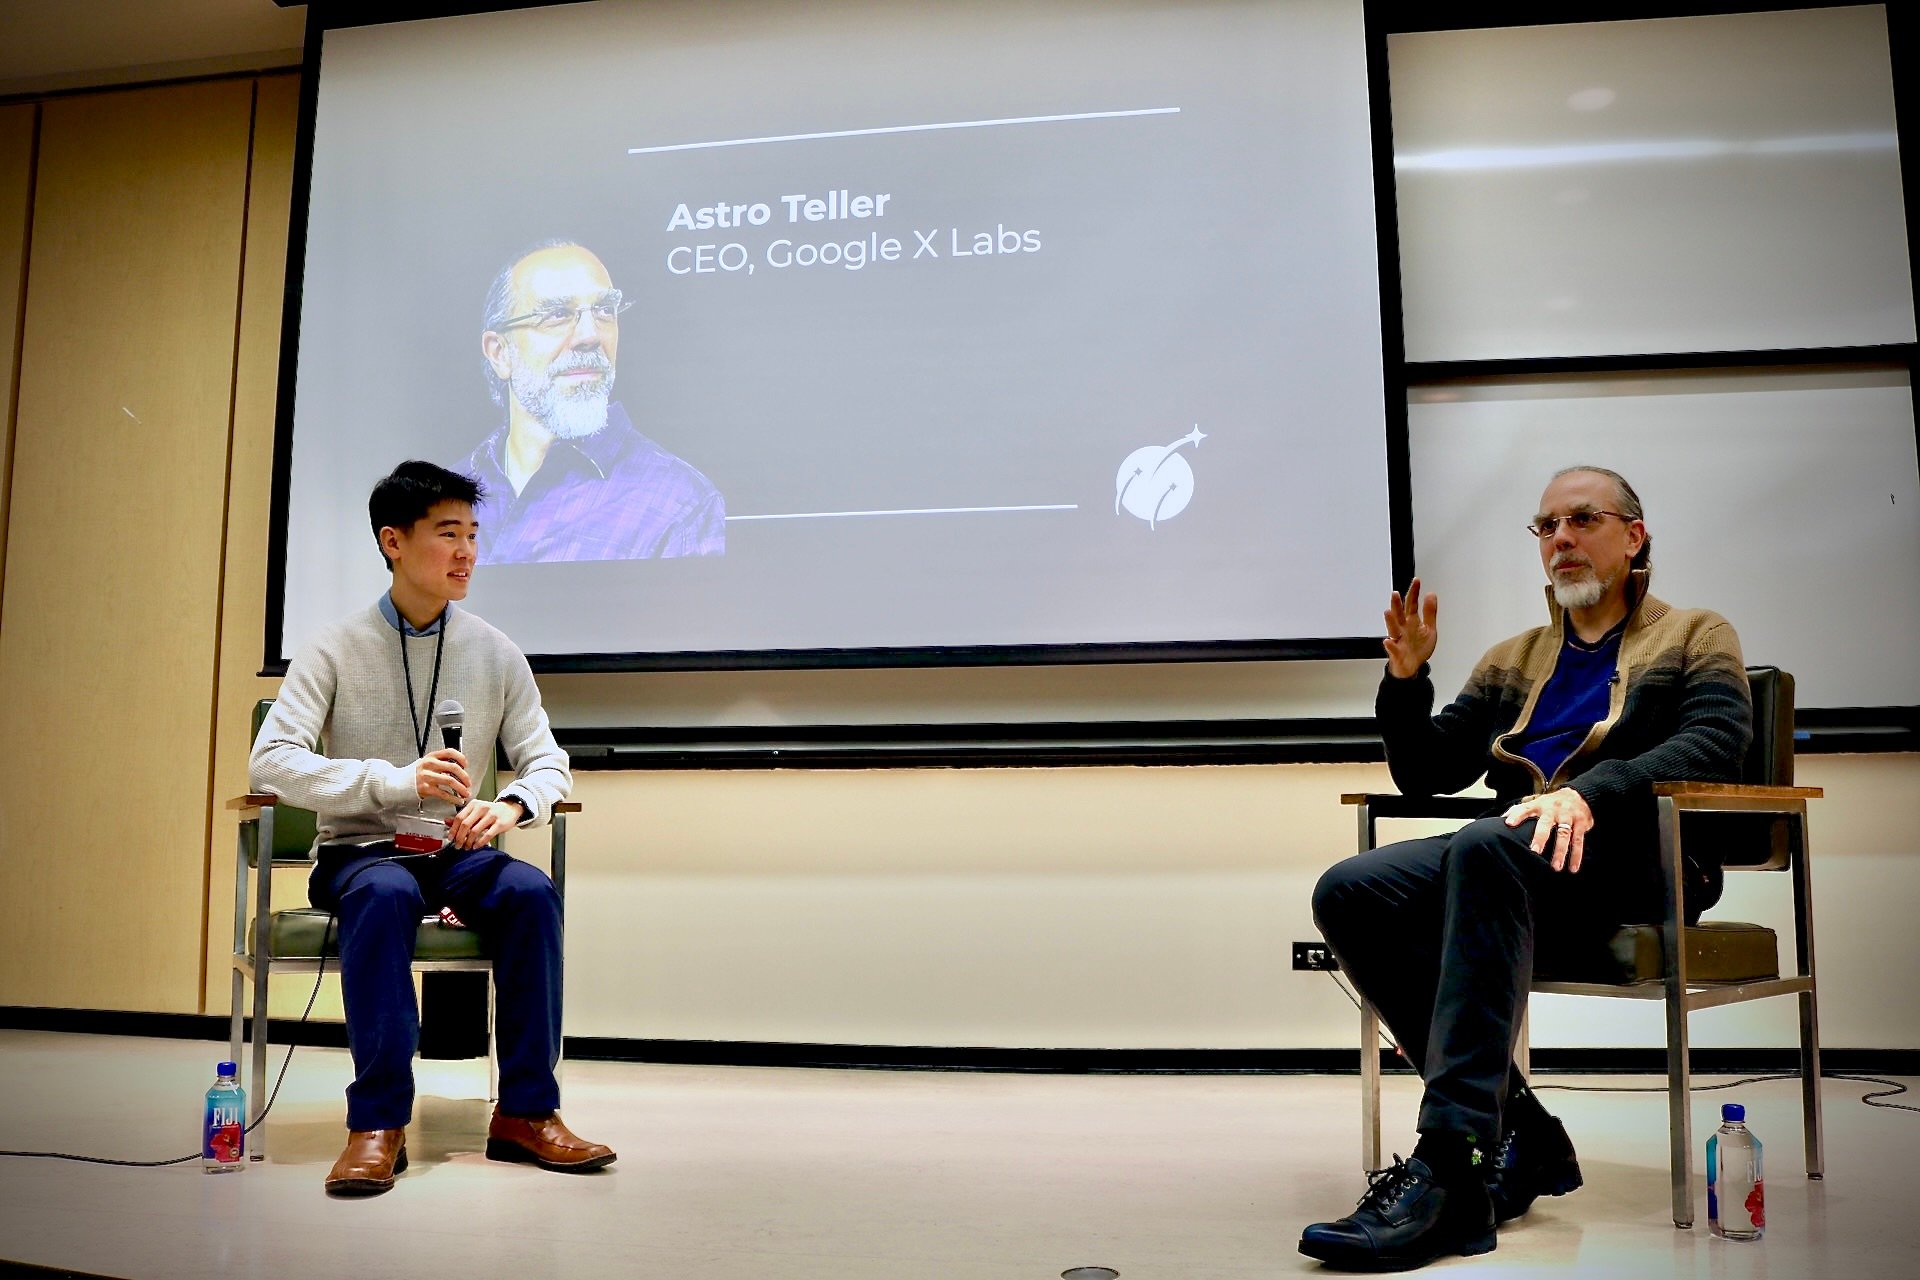 CEO of Google X Labs and Stanford alum Eric “Astro” Teller ’93 encouraged students to search for science fiction-sounding solutions to world pro